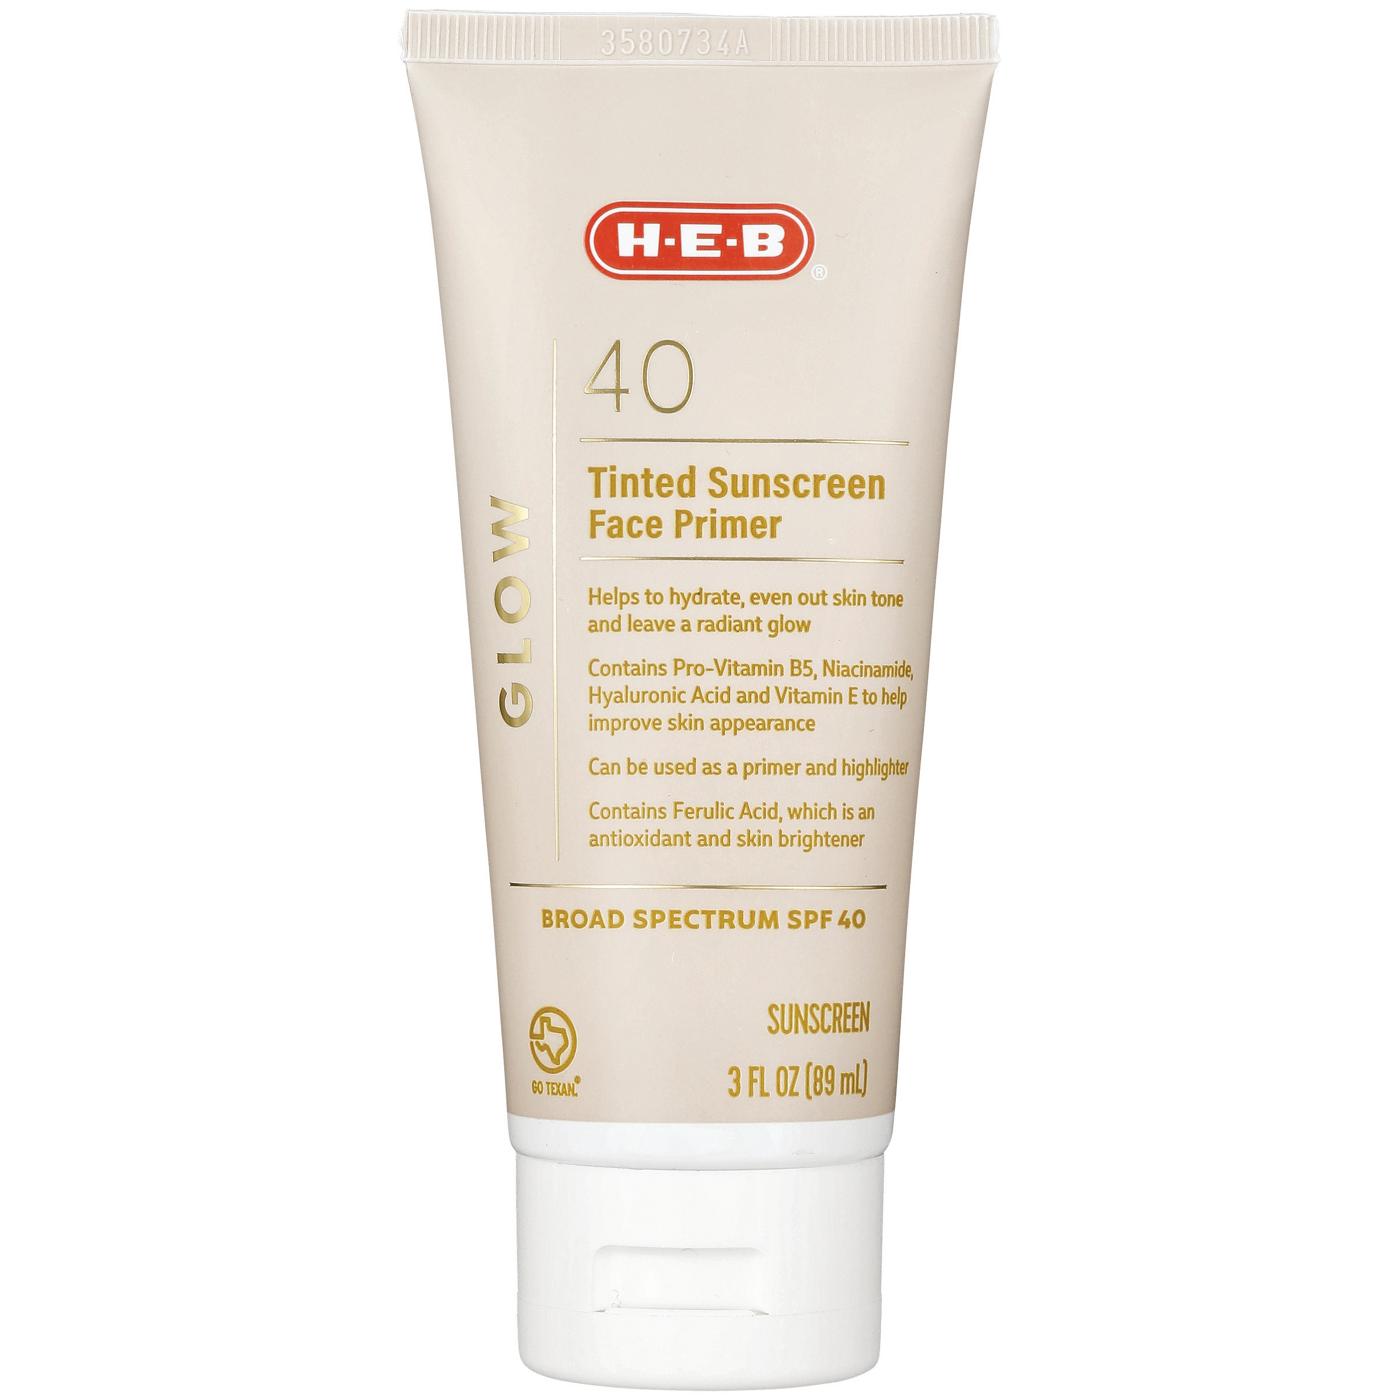 H-E-B Tinted Glow Face Primer Sunscreen Lotion – SPF 40; image 1 of 2